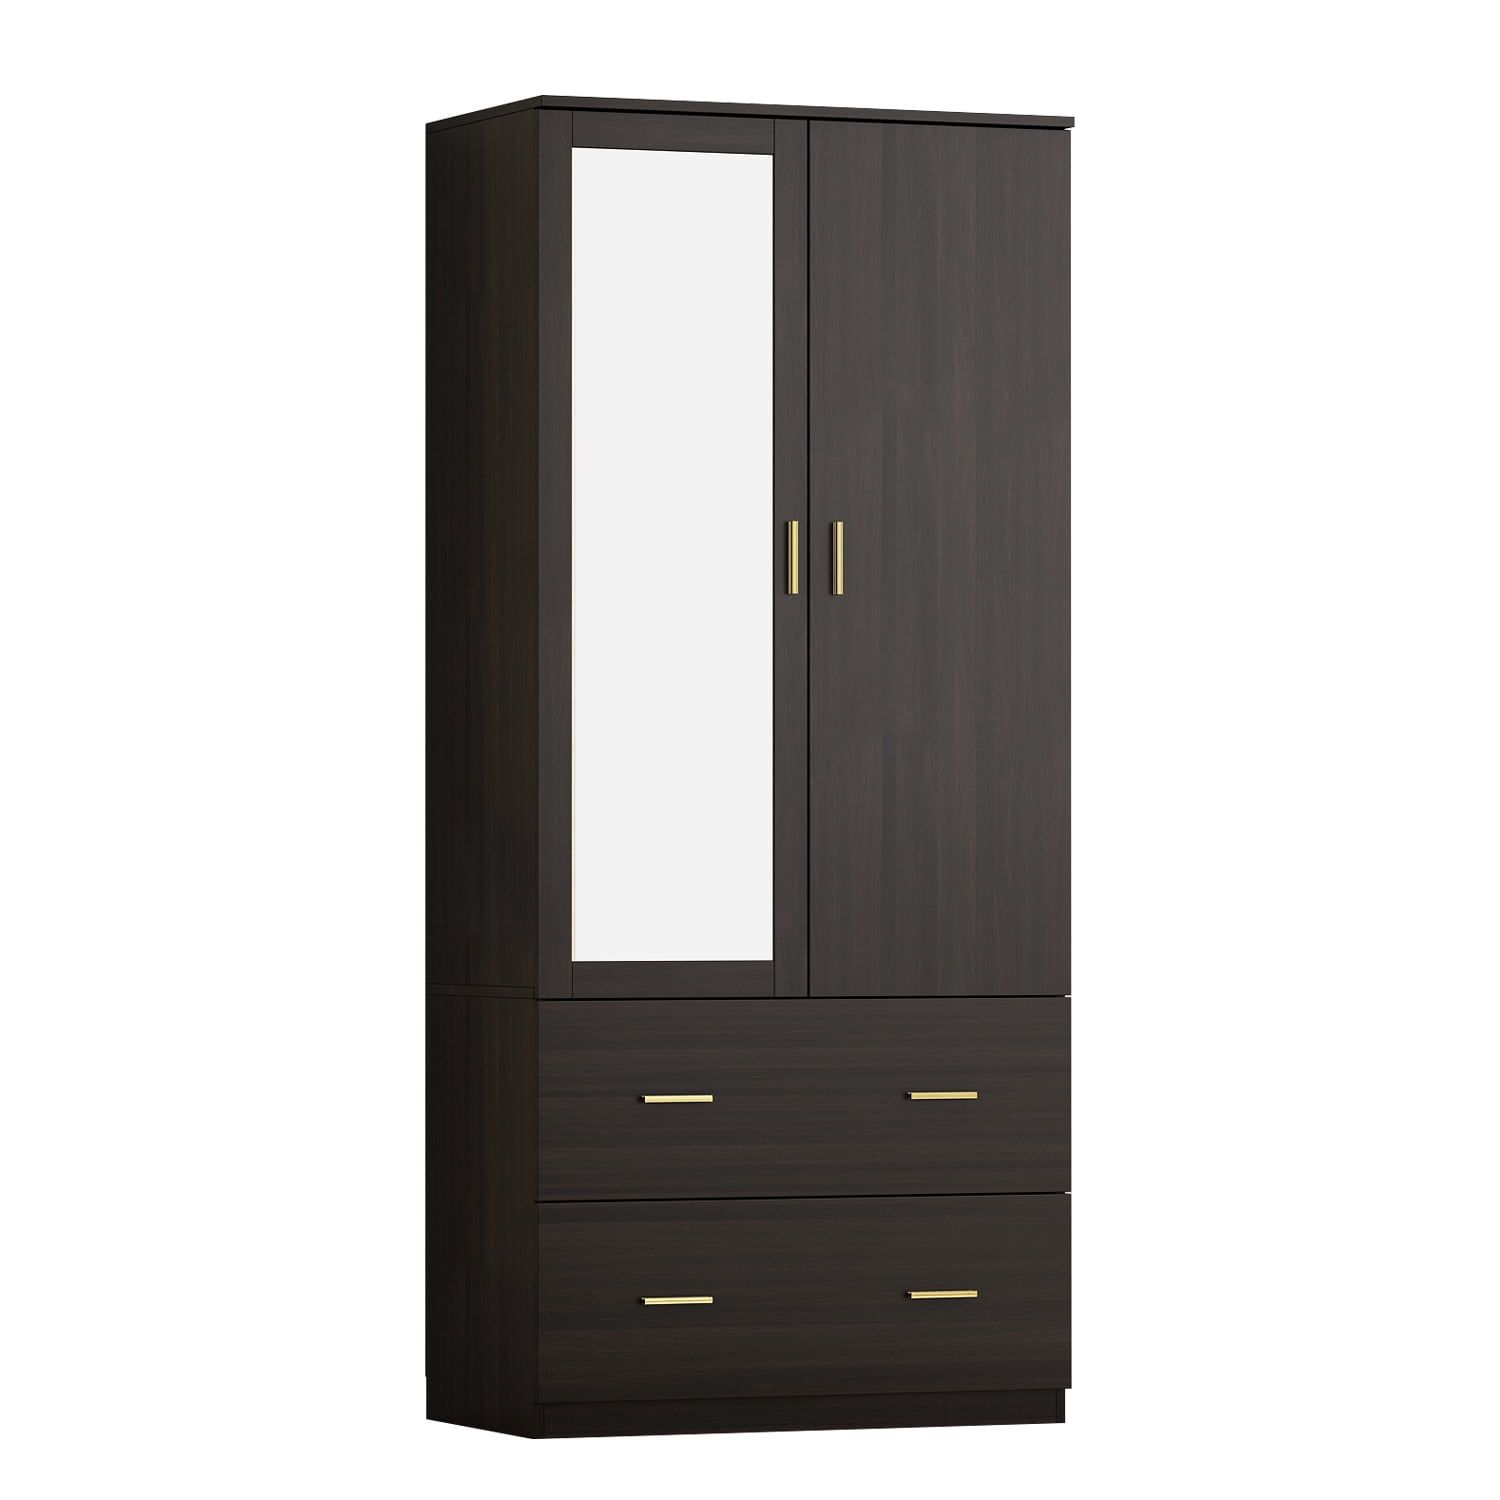 Hitow 2 Door Wardrobe Armoire Closet With Two Drawers, Clothing Rod And  Shelves For Bedroom Espresso – Walmart Regarding Espresso Wardrobes (View 12 of 15)